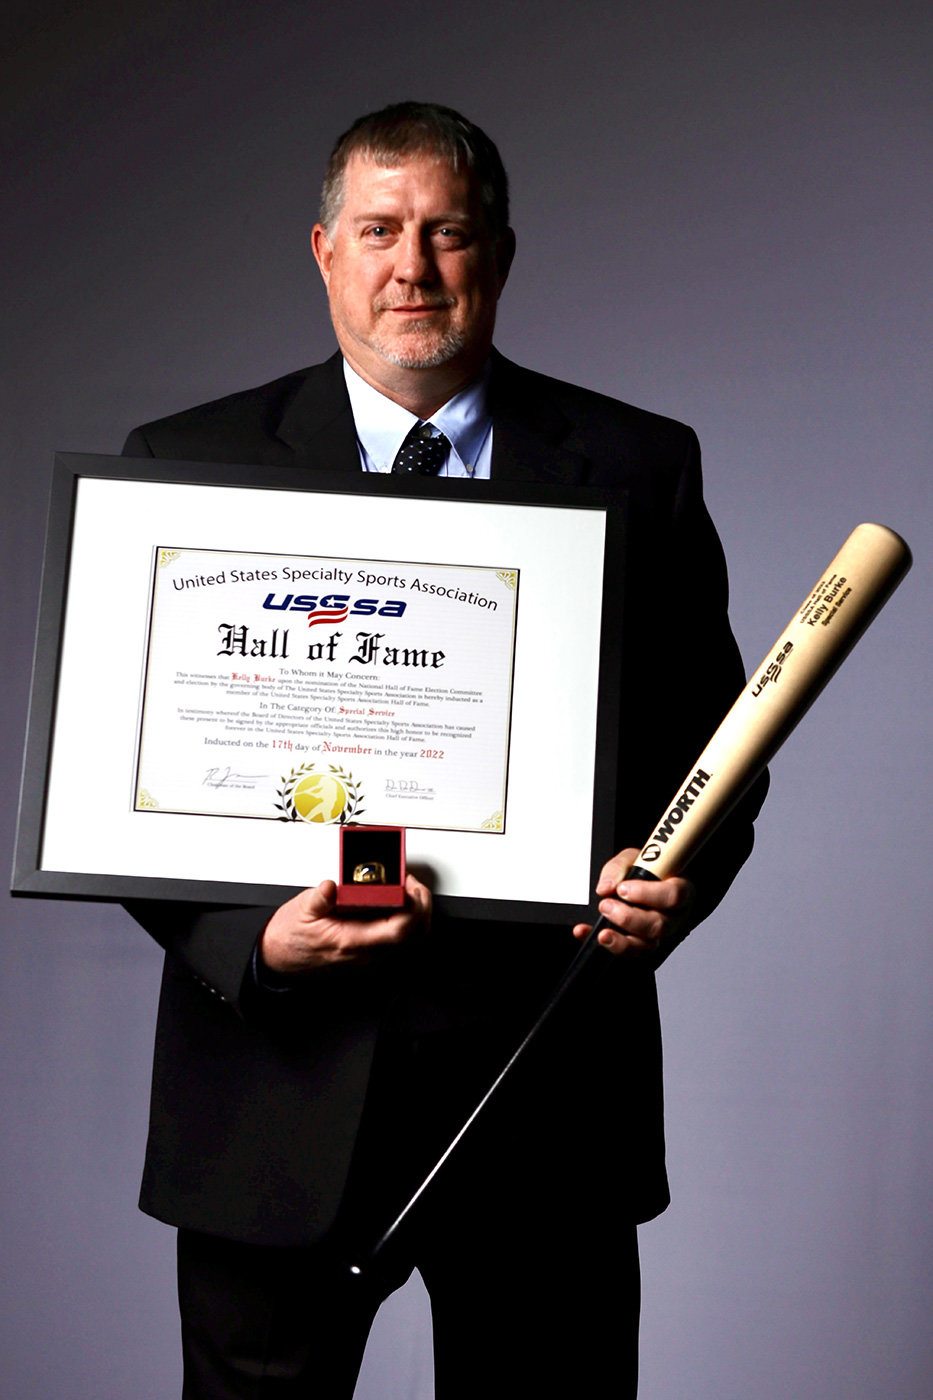 Kelly Burke was inducted into the United States Specialty Sports Association’s Hall of Fame last month in Orlando, Florida, for creating the USSSA’s management database.